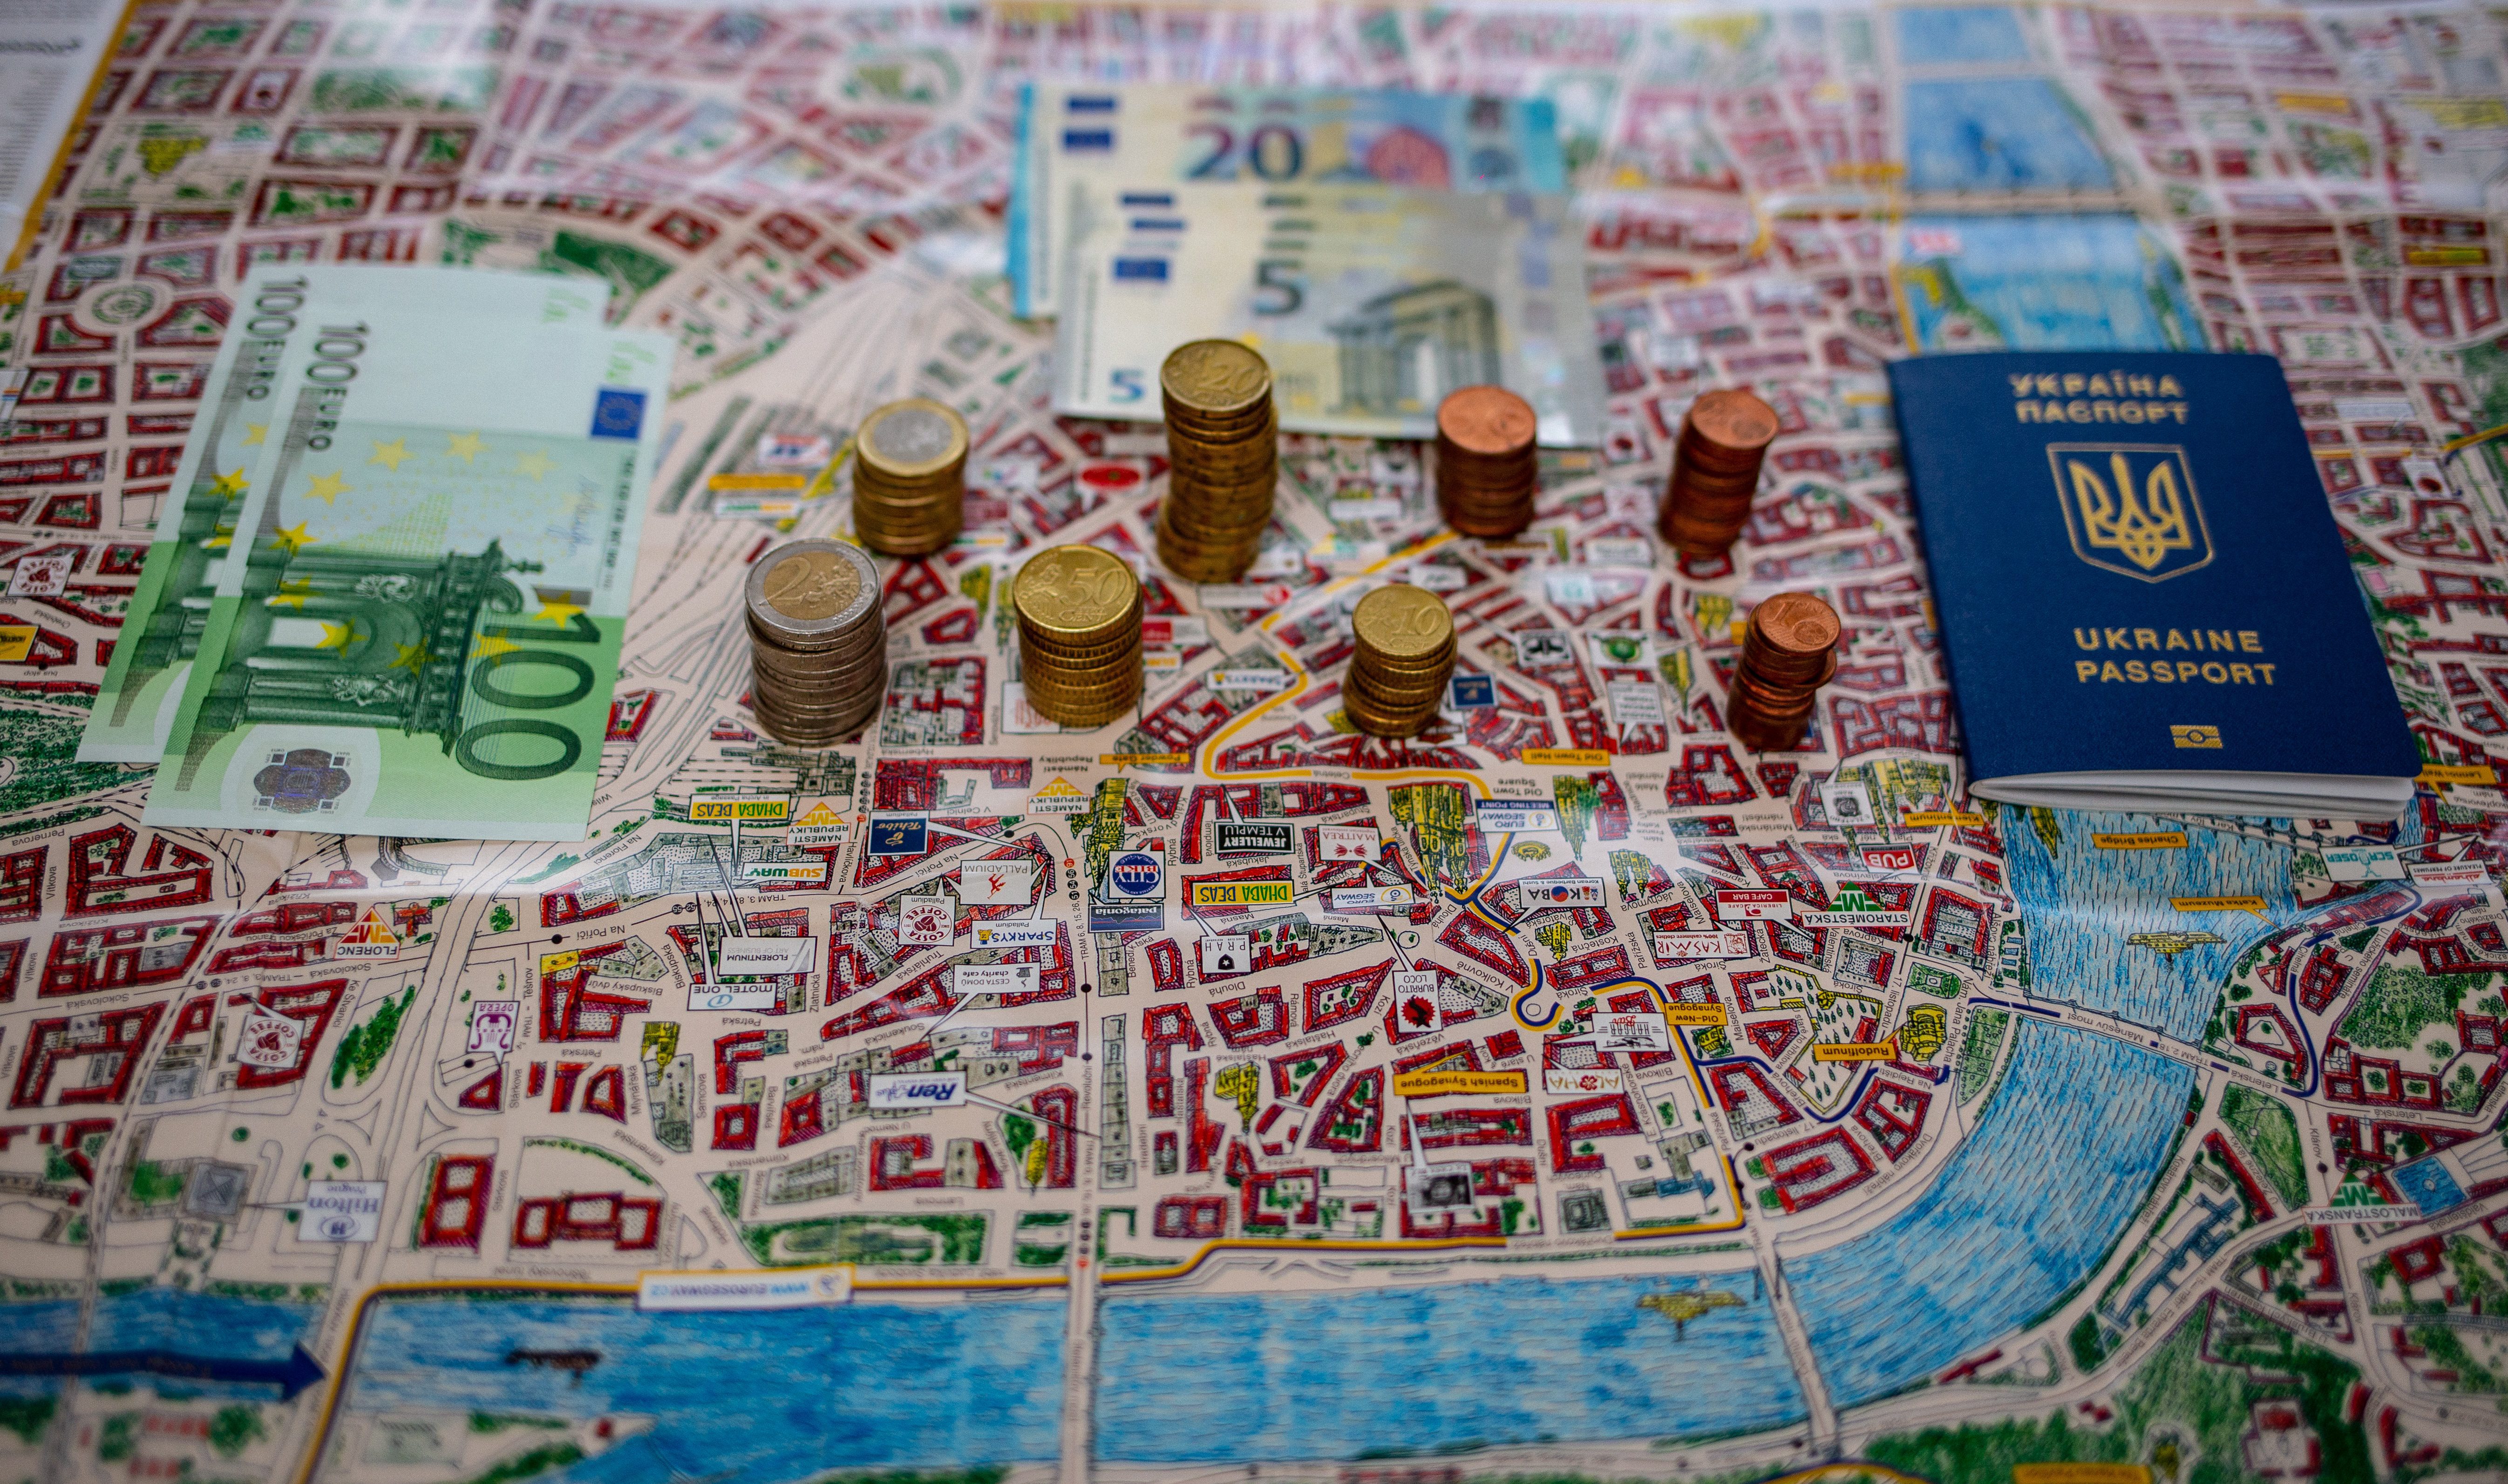 City map with cash and bills 